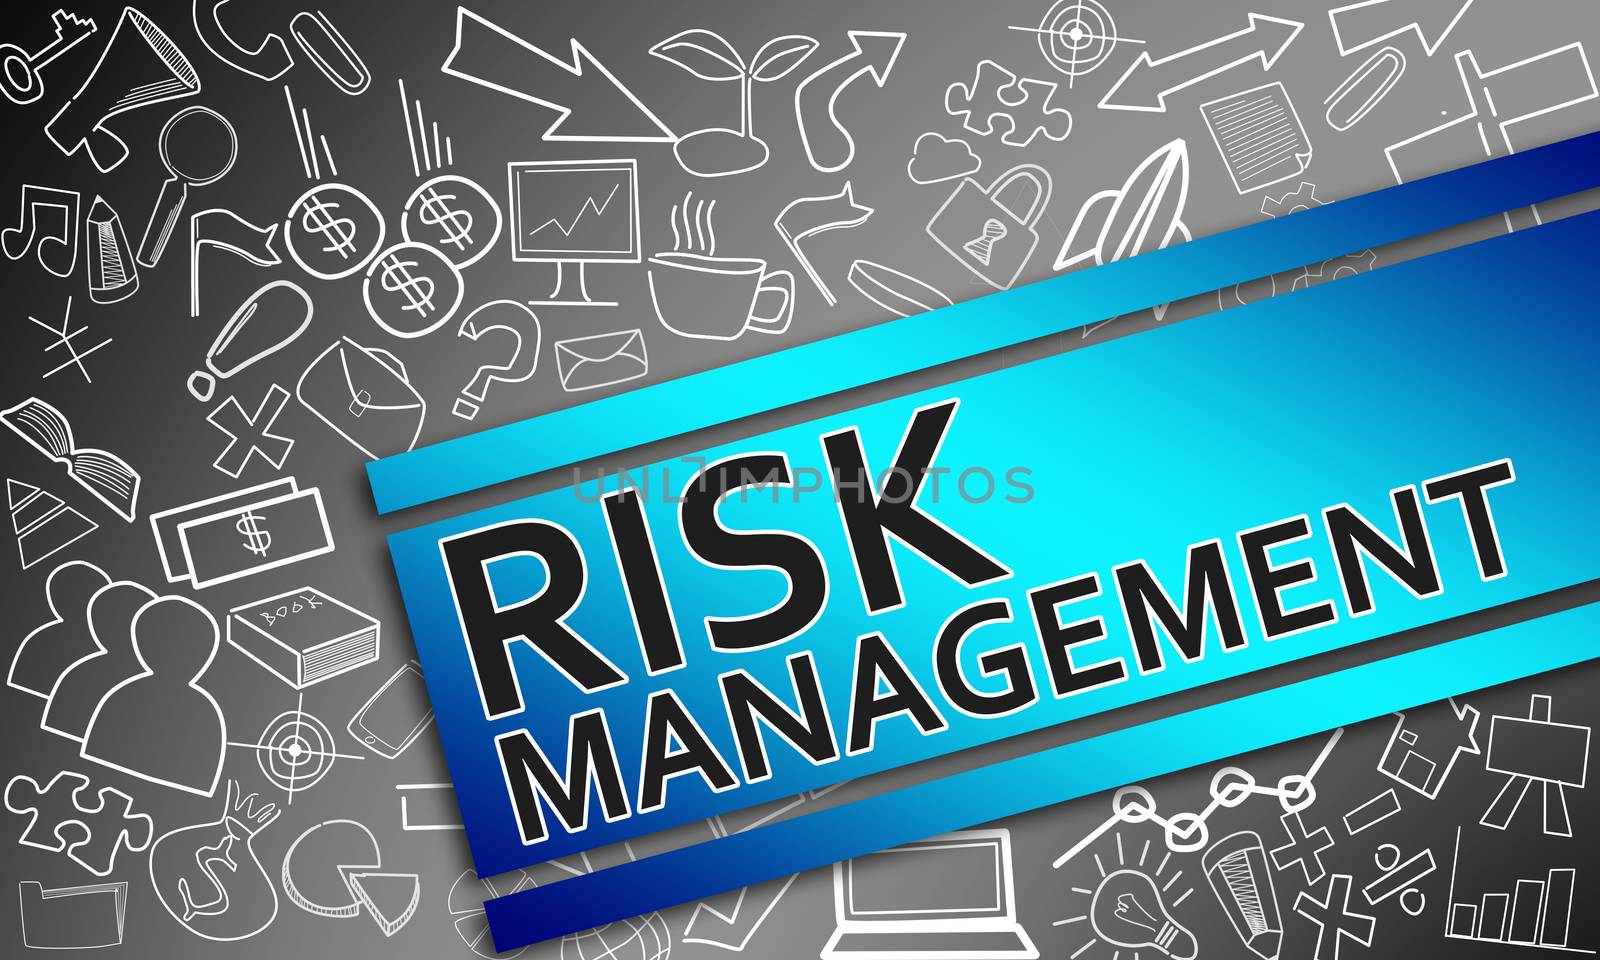 Risk management concept with creative icon drawings by tang90246